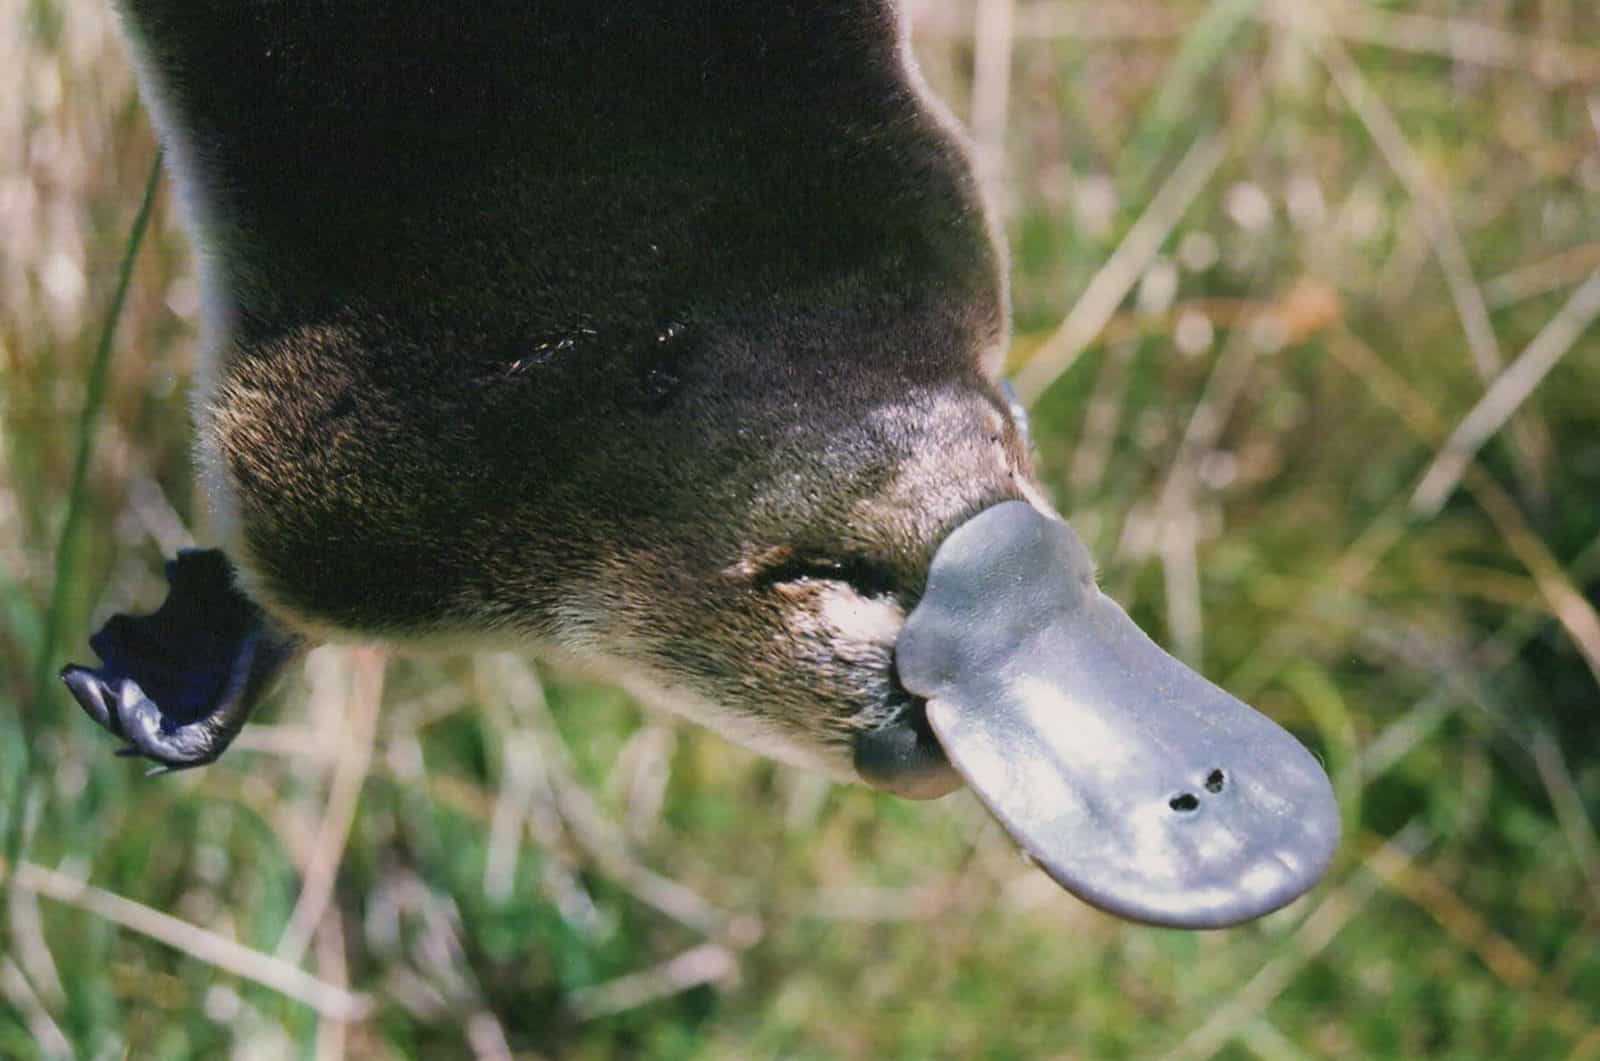 The platypus breeding at Warrawong Wildlife Sanctuary attract tourists from far and wide.